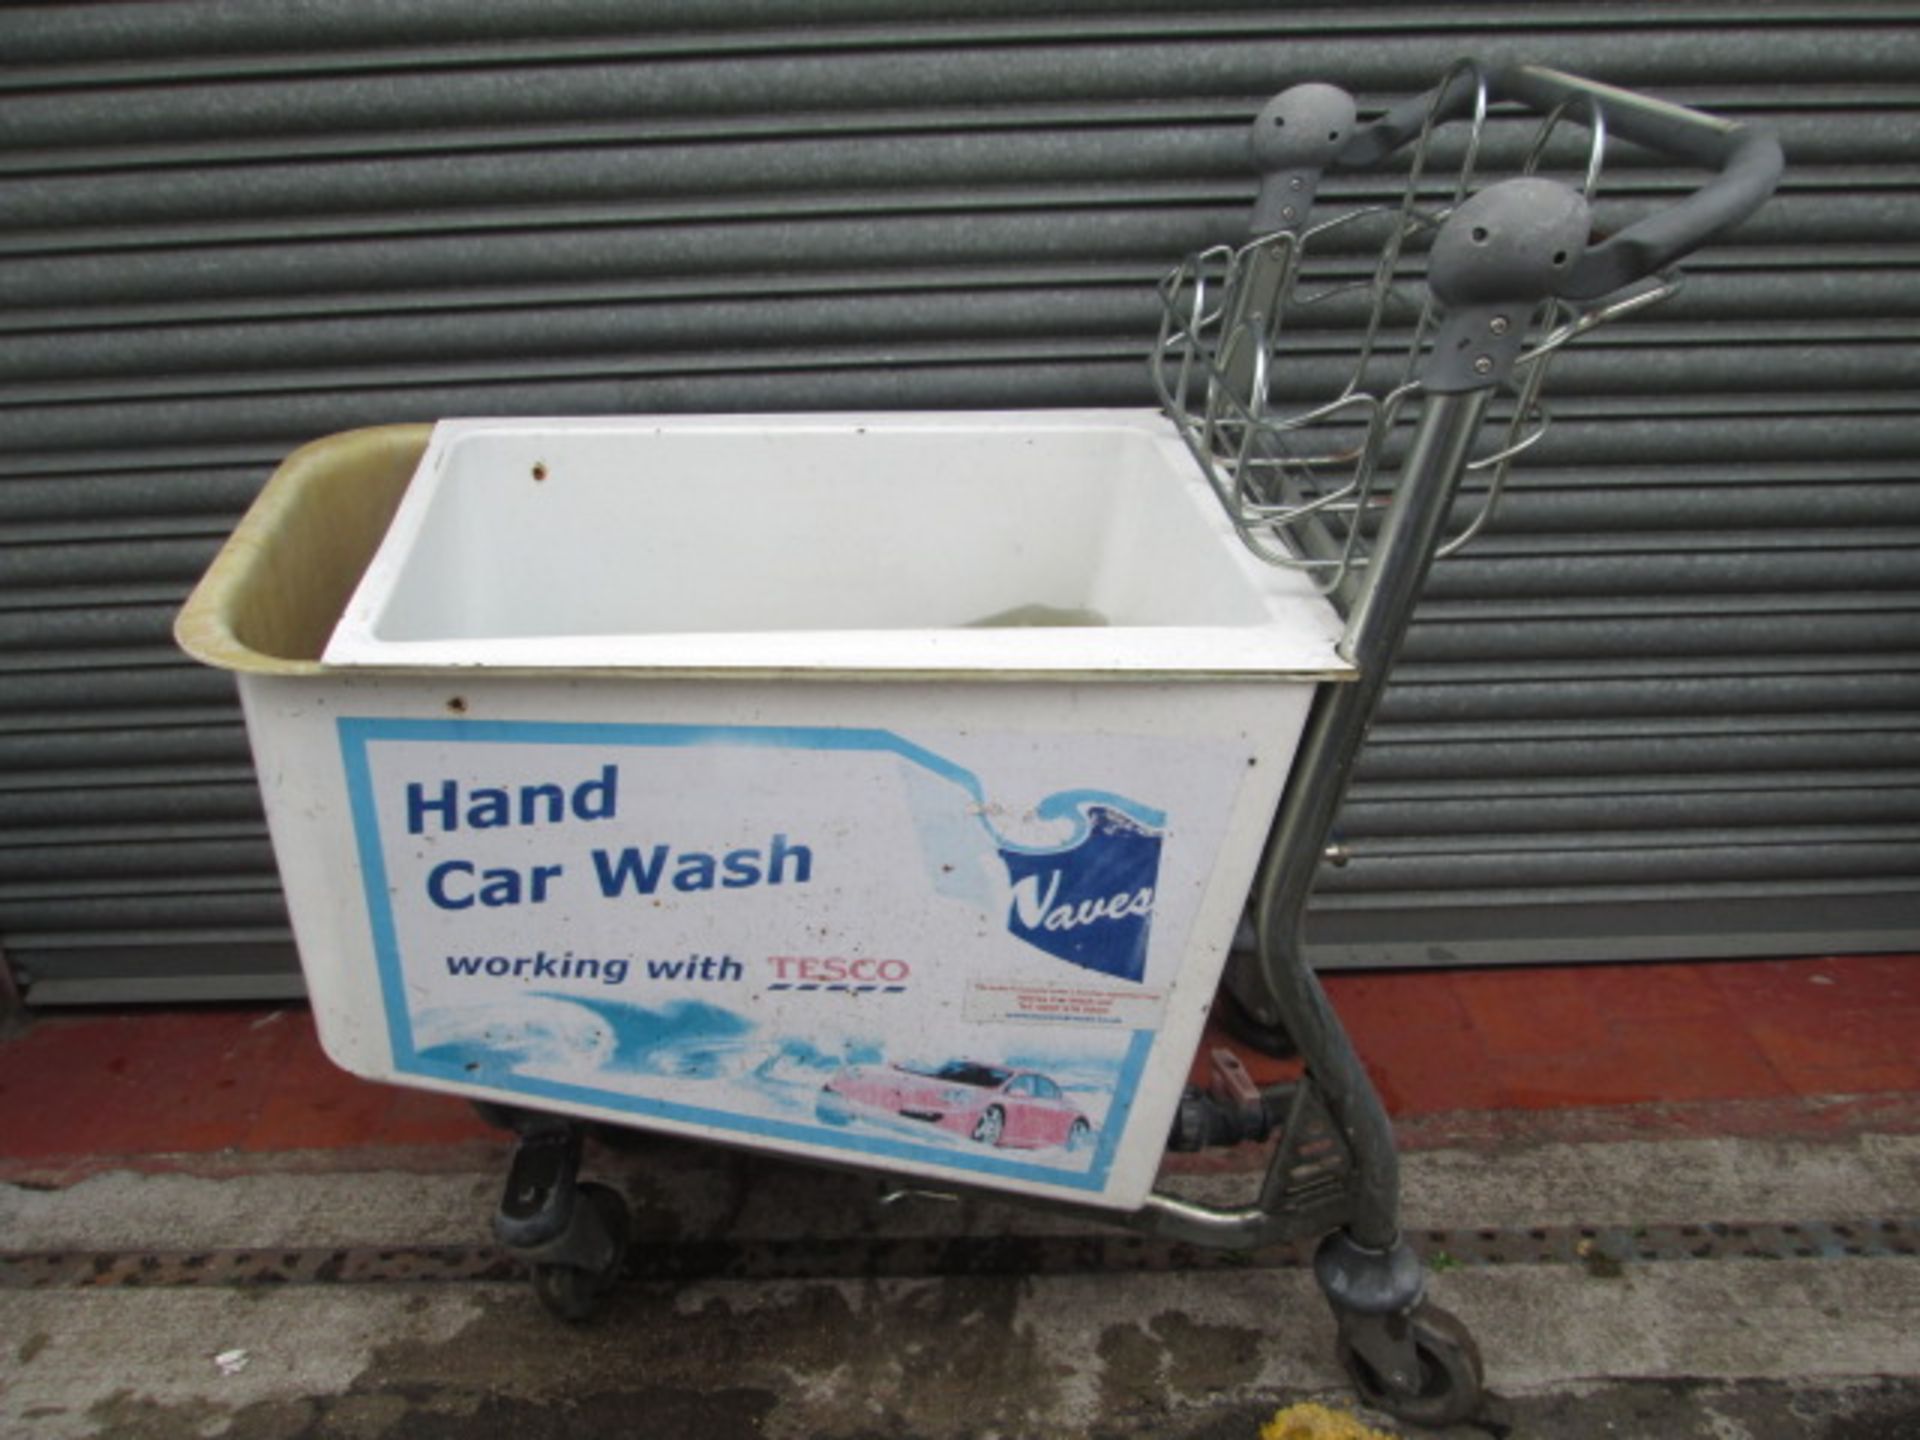 8 x Airport Style Baggage Trolleys with Custom Fitted Hand Car Wash Fibreglass Tanks.